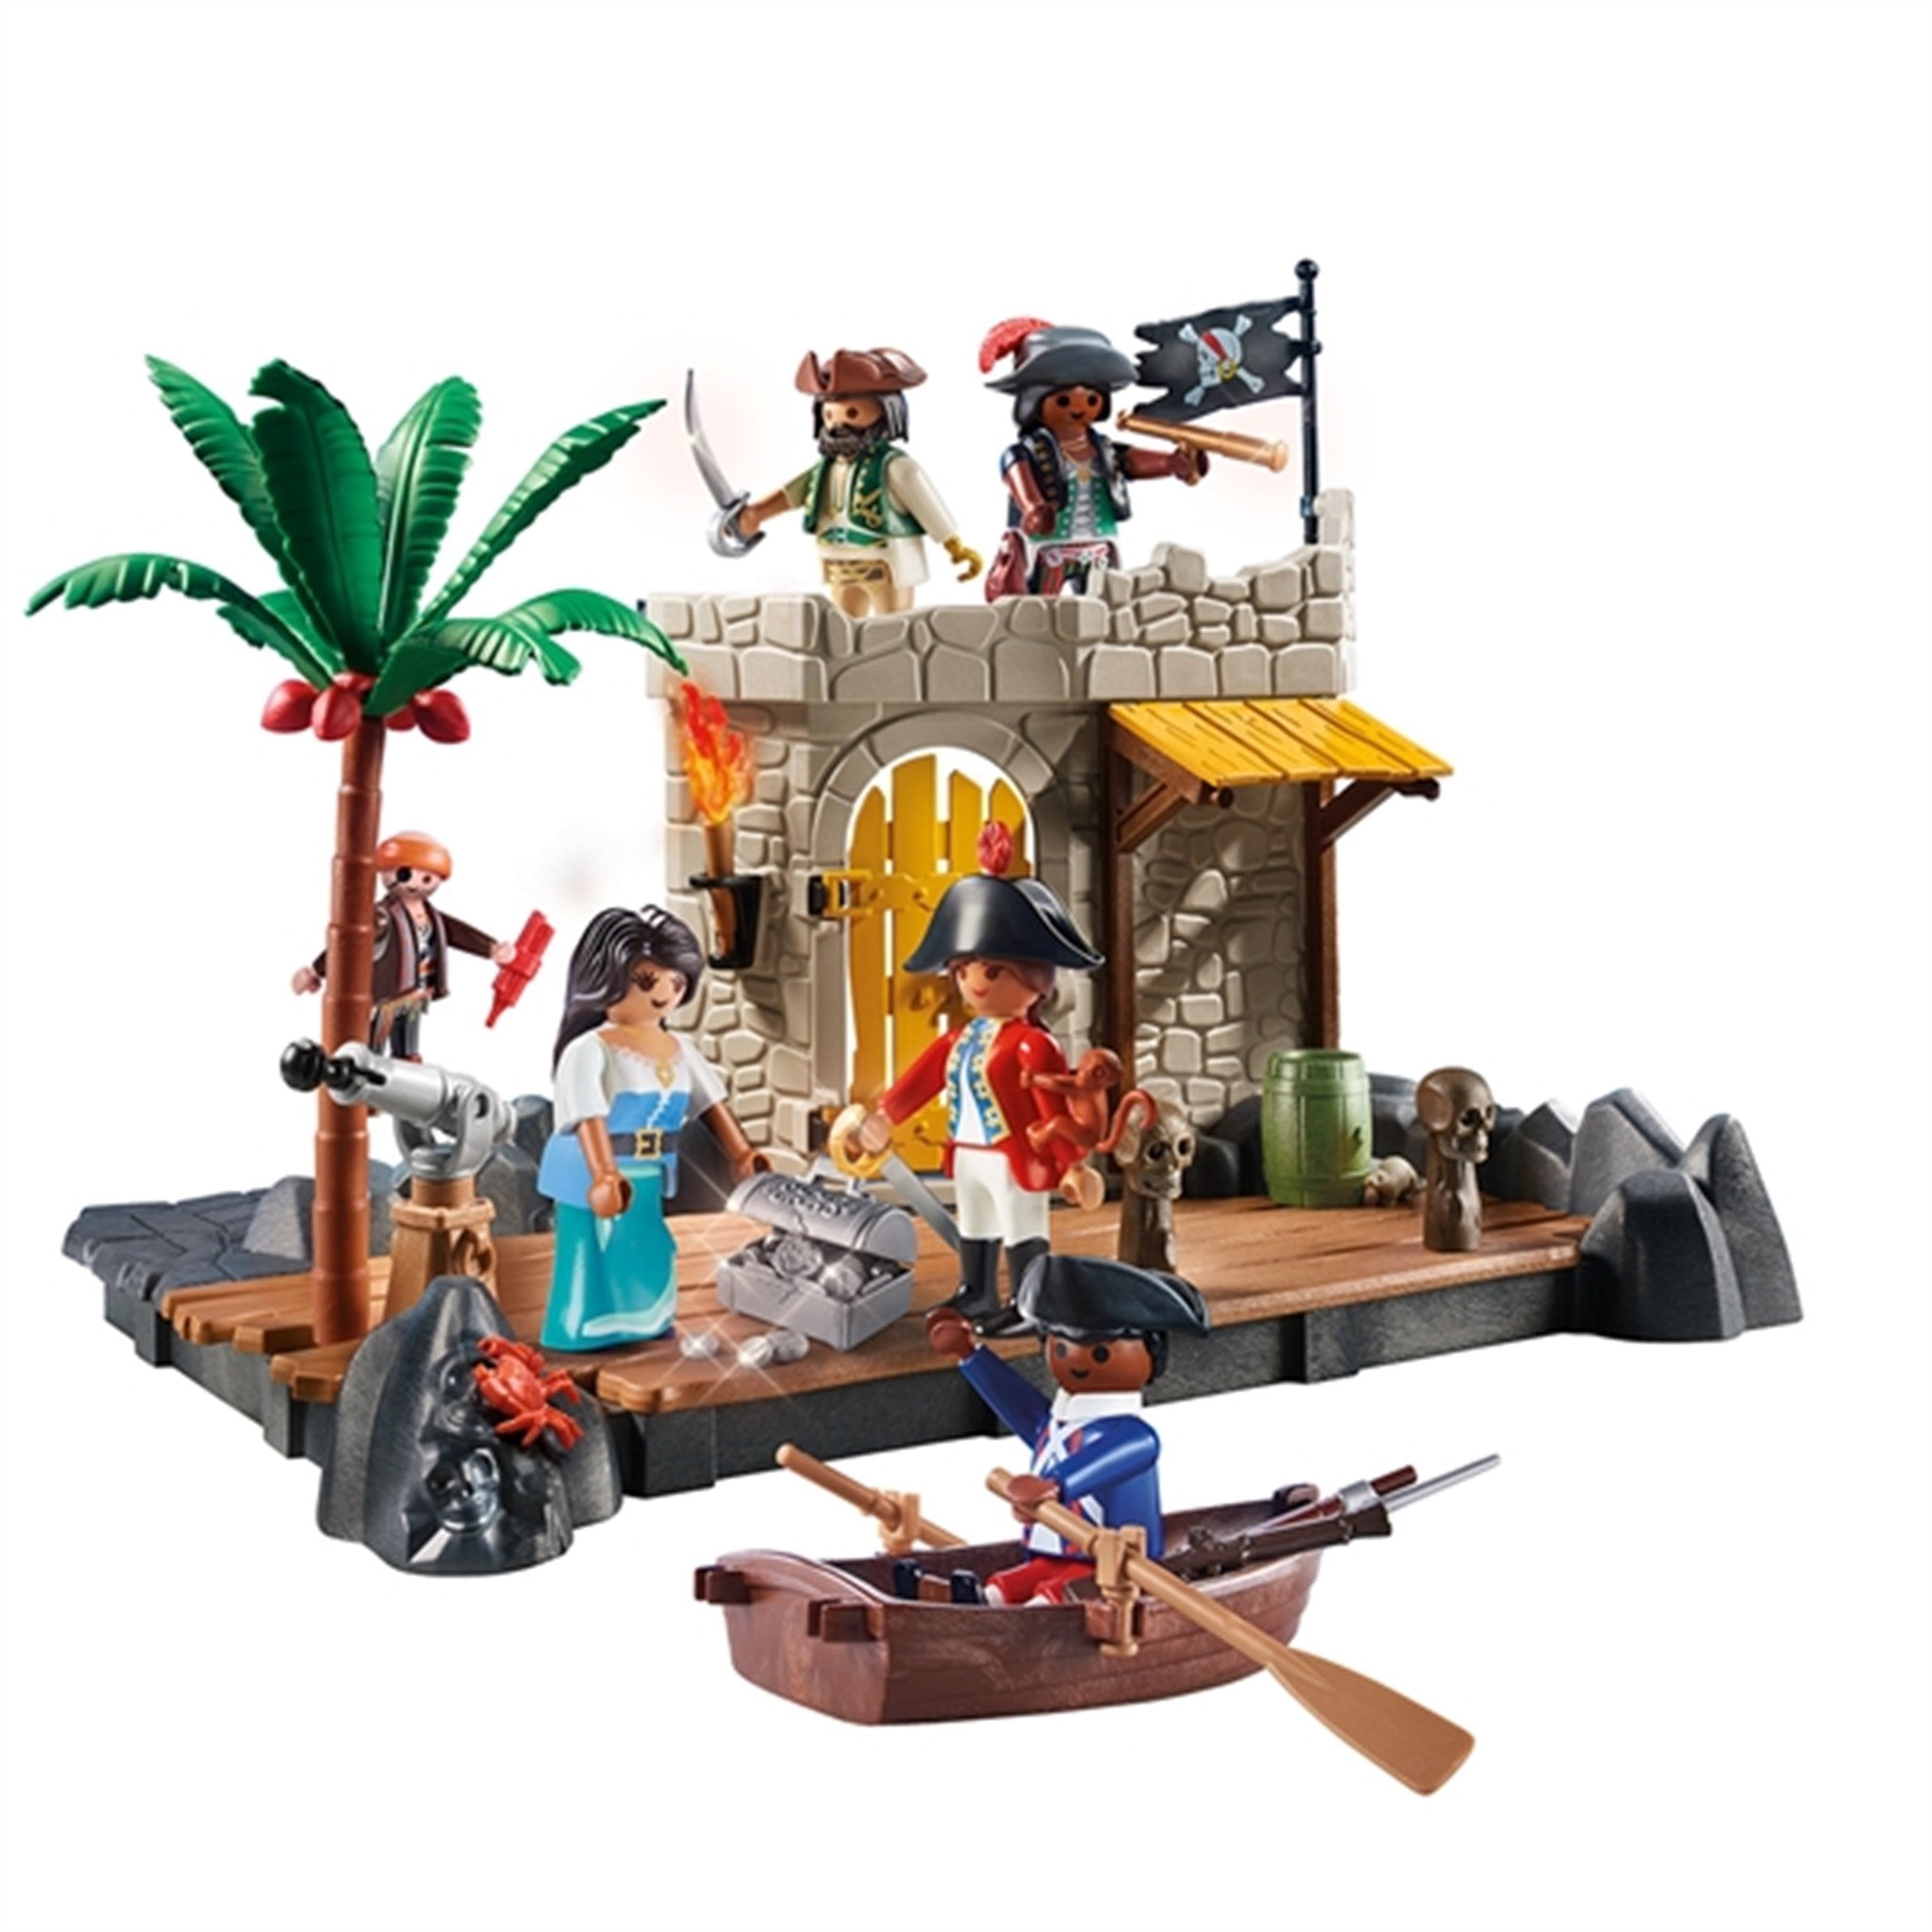 Playmobil® Figures - My Figures: Island of the Pirates 4